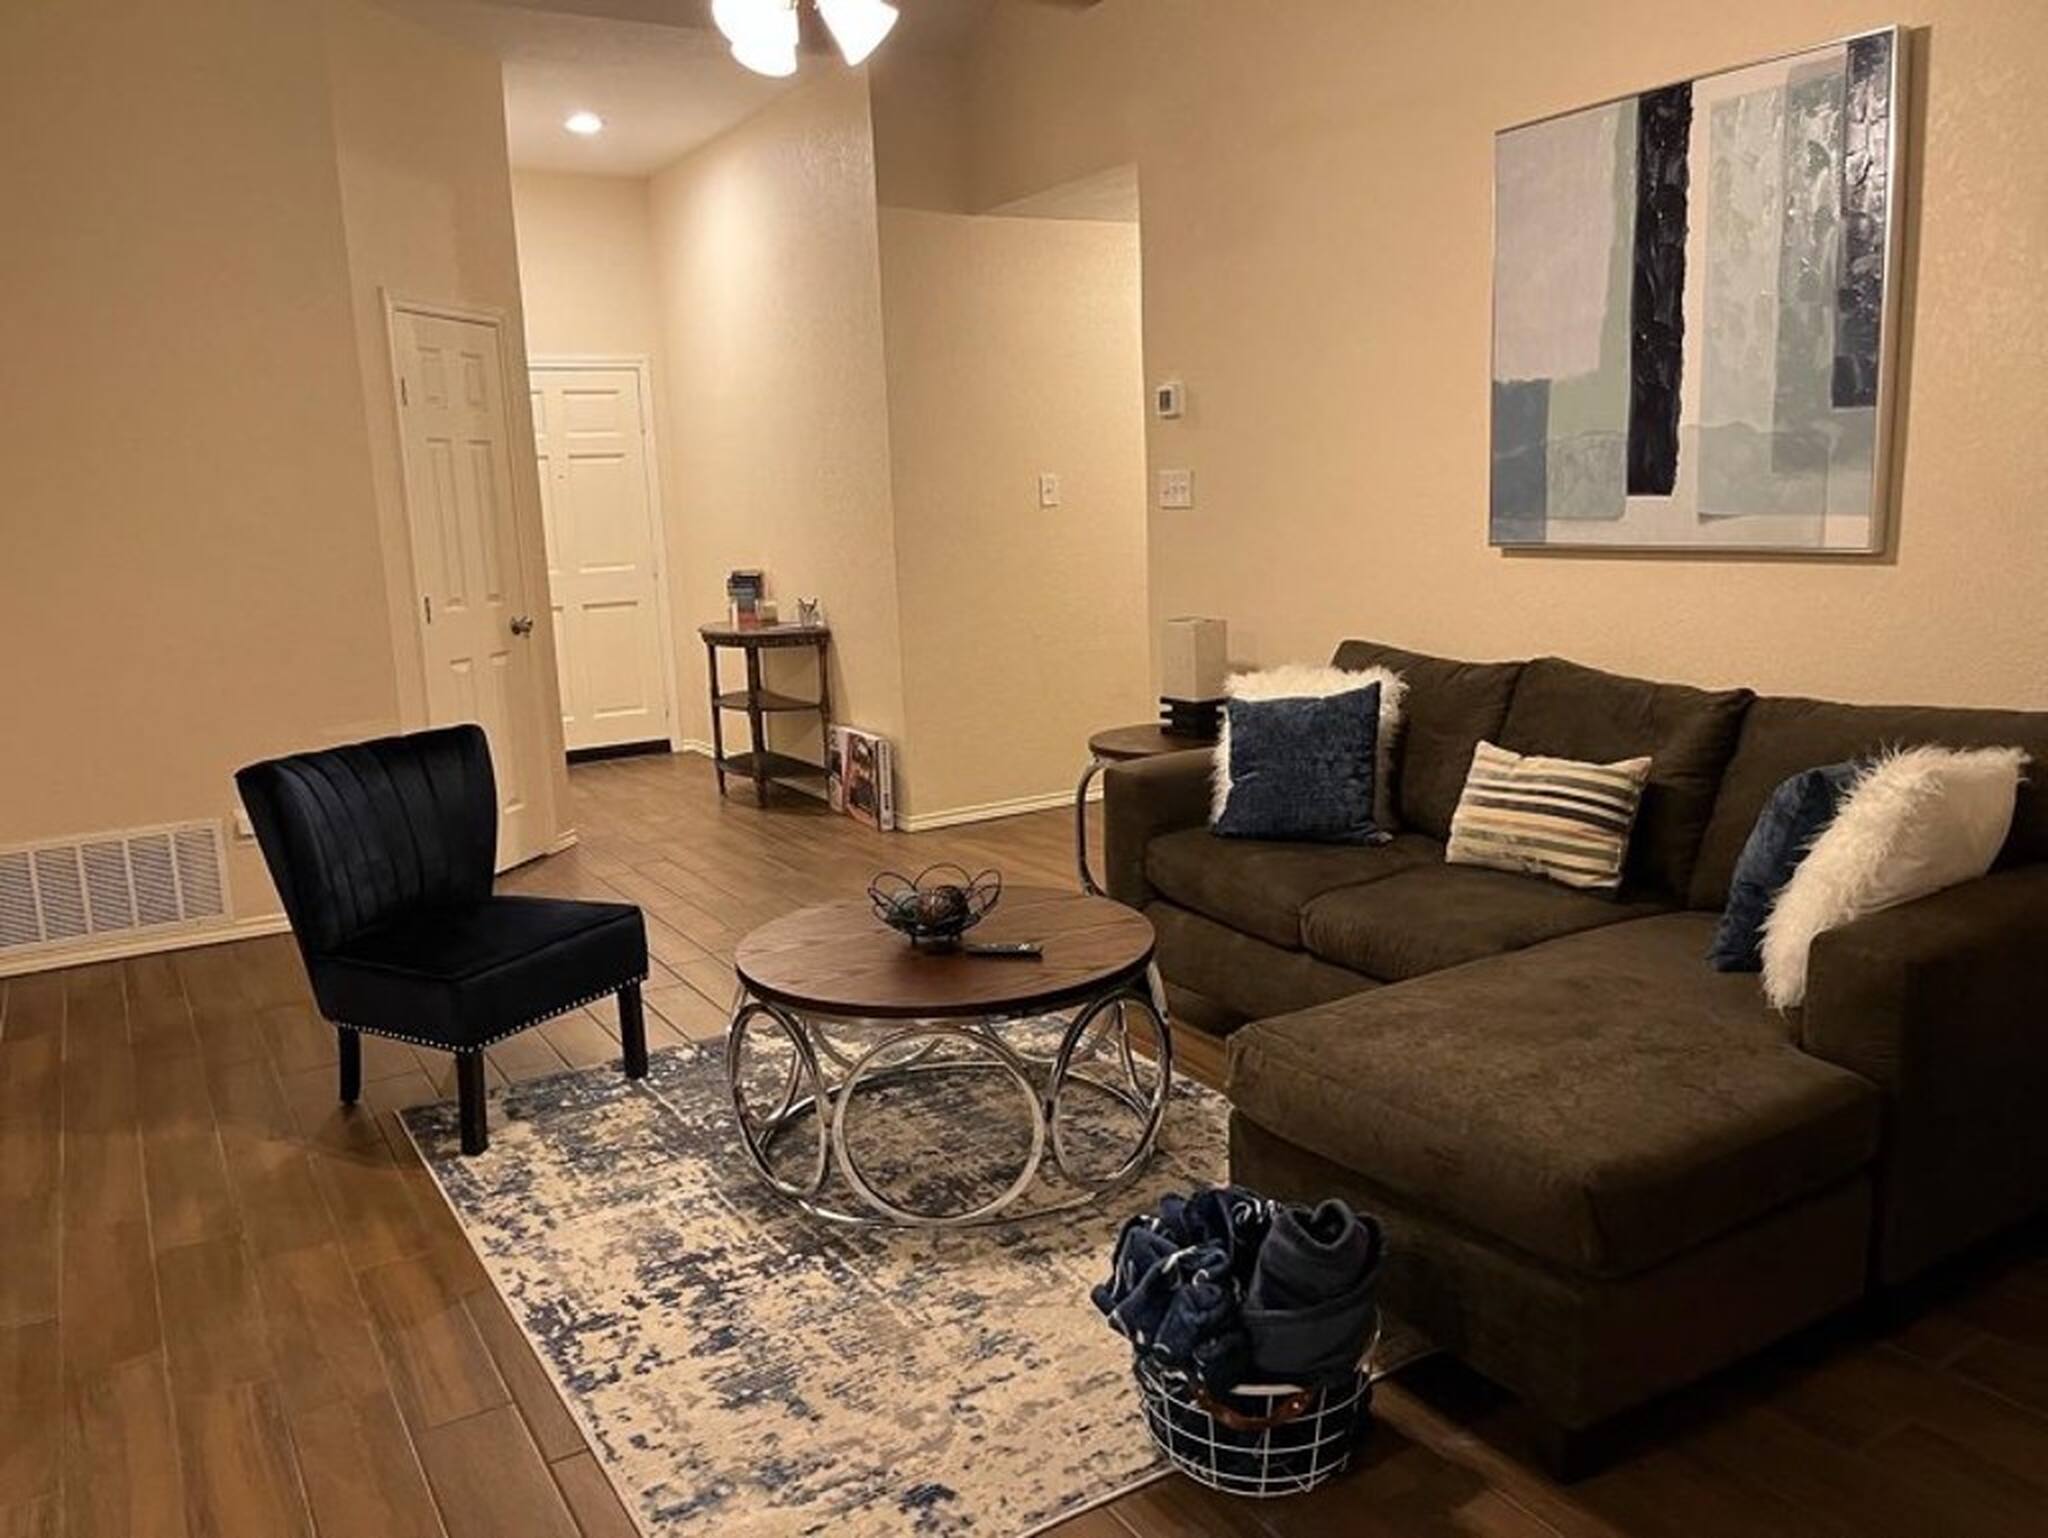 Cozy Pet Friendly Home W/yard - Meadowbrook - Fort Worth